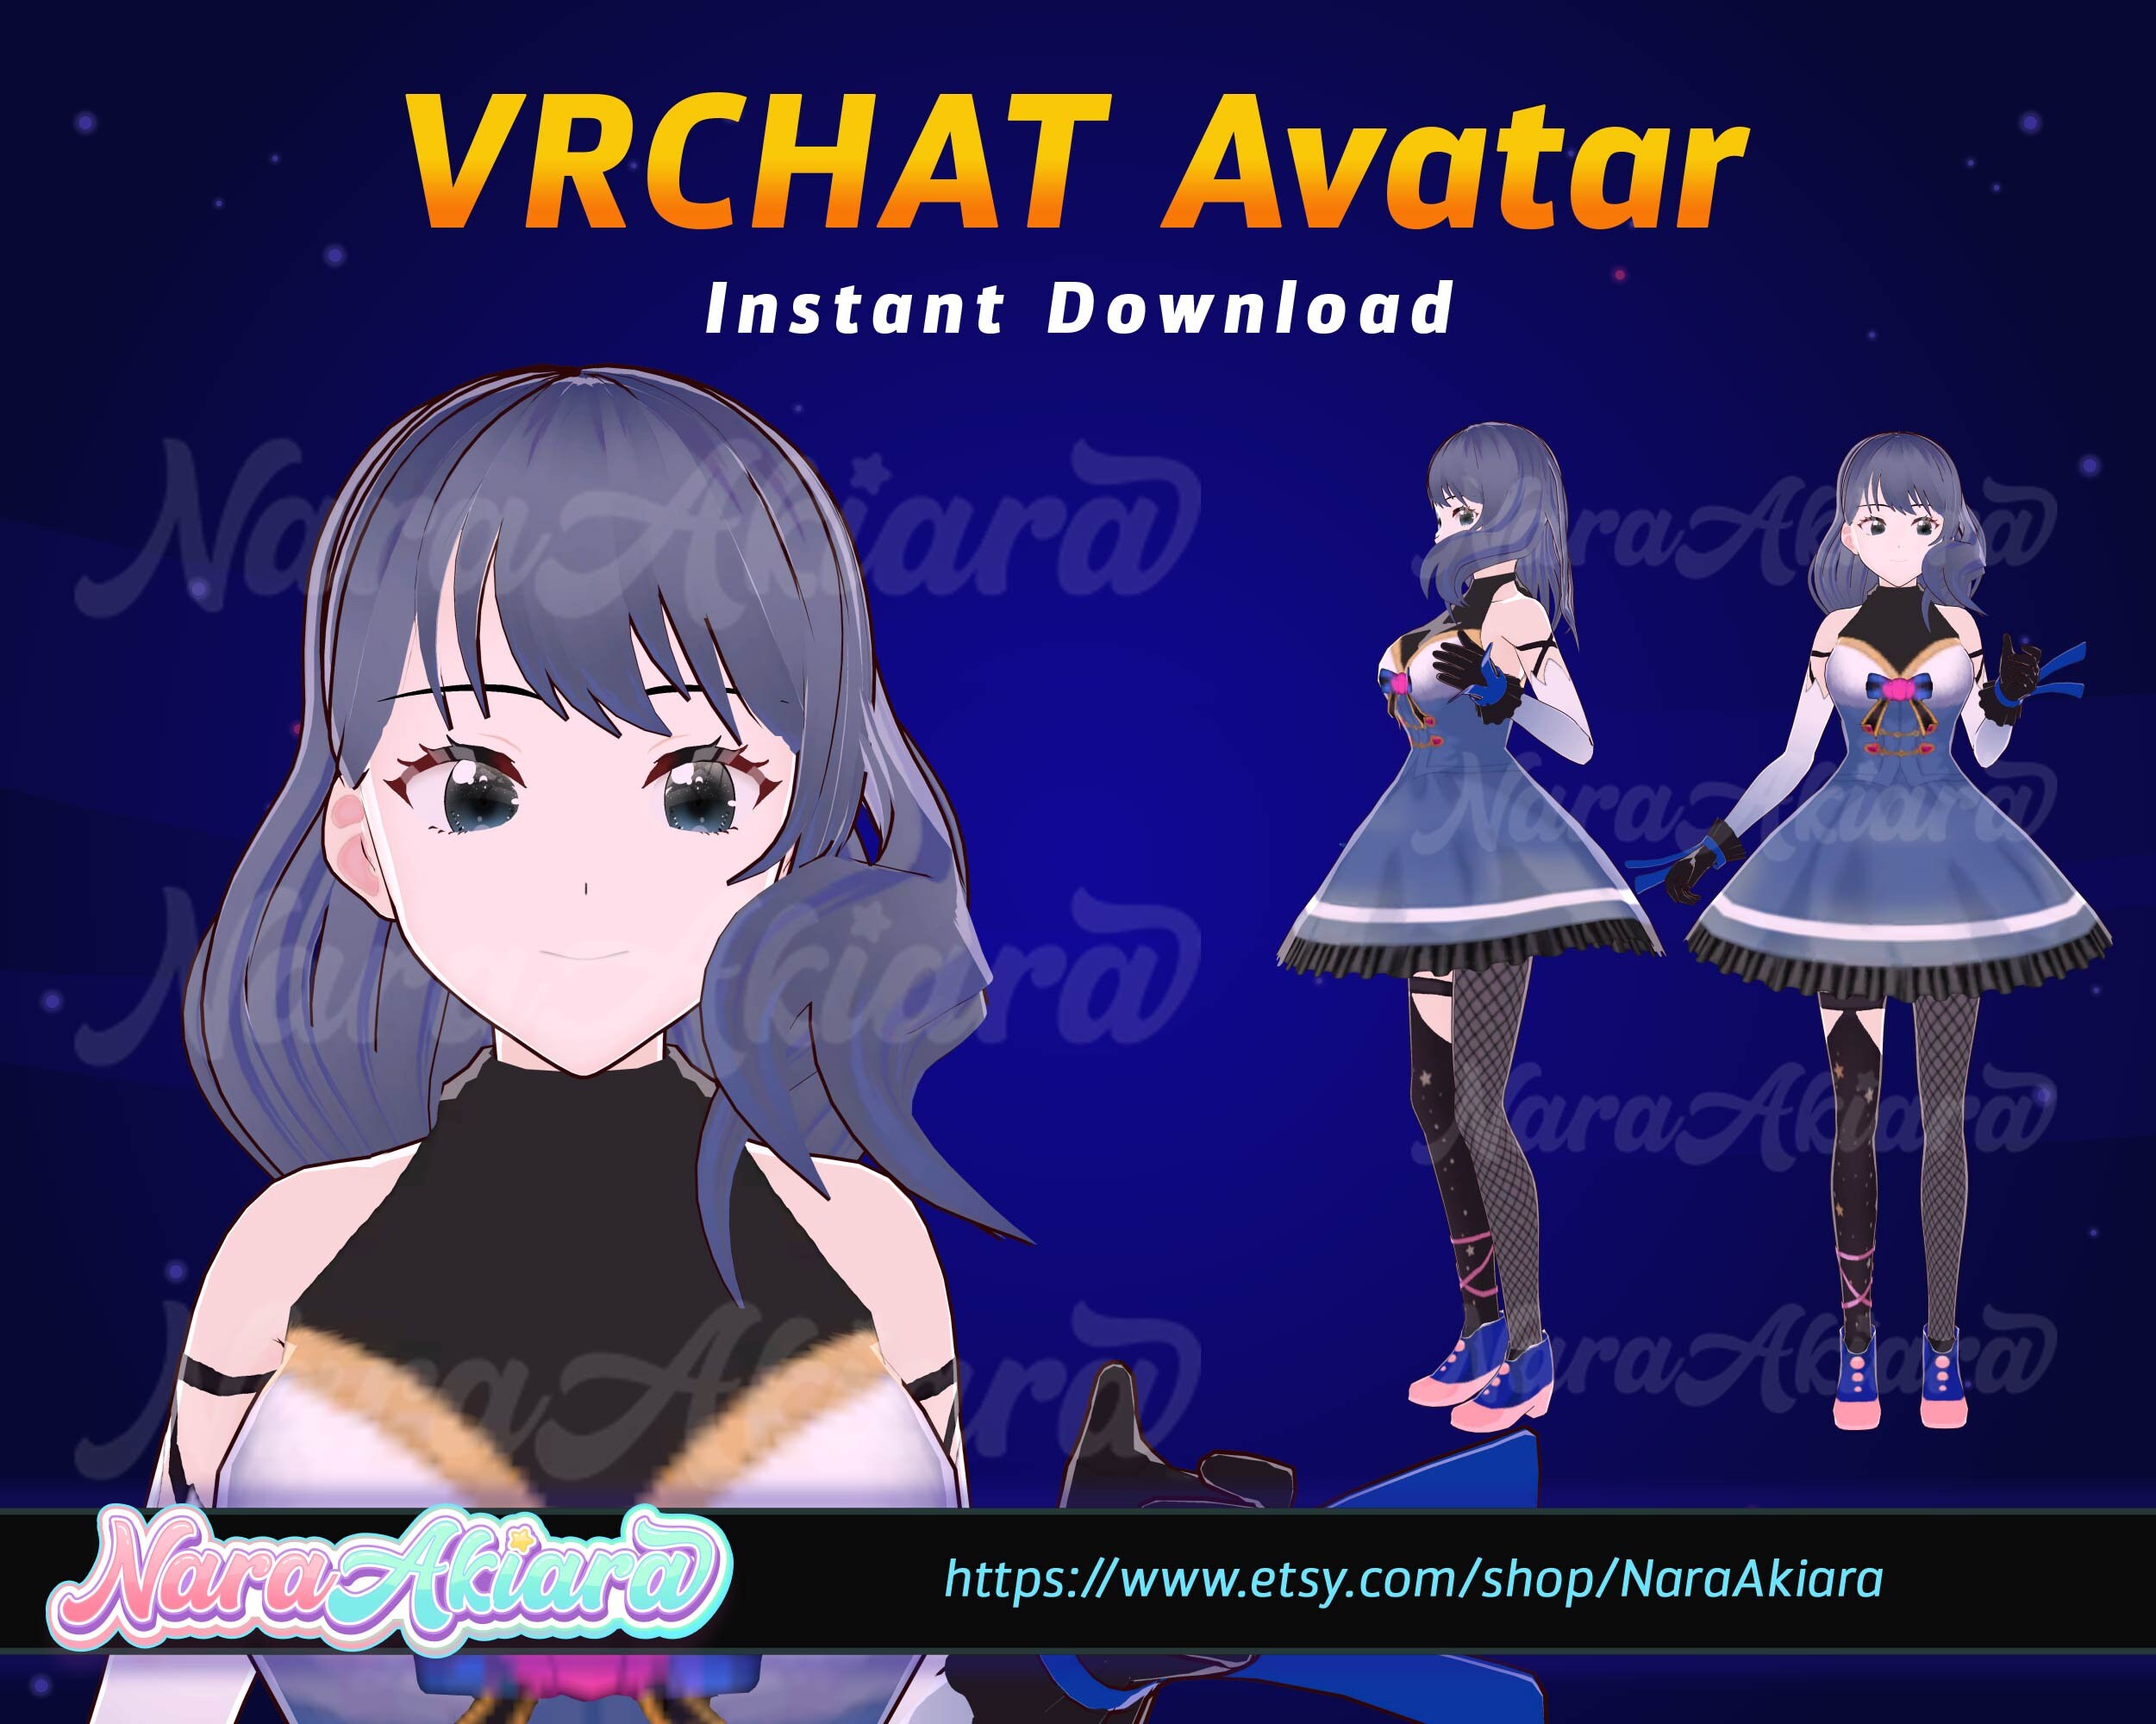 How to get custom avatars in VRChat  Gamepur